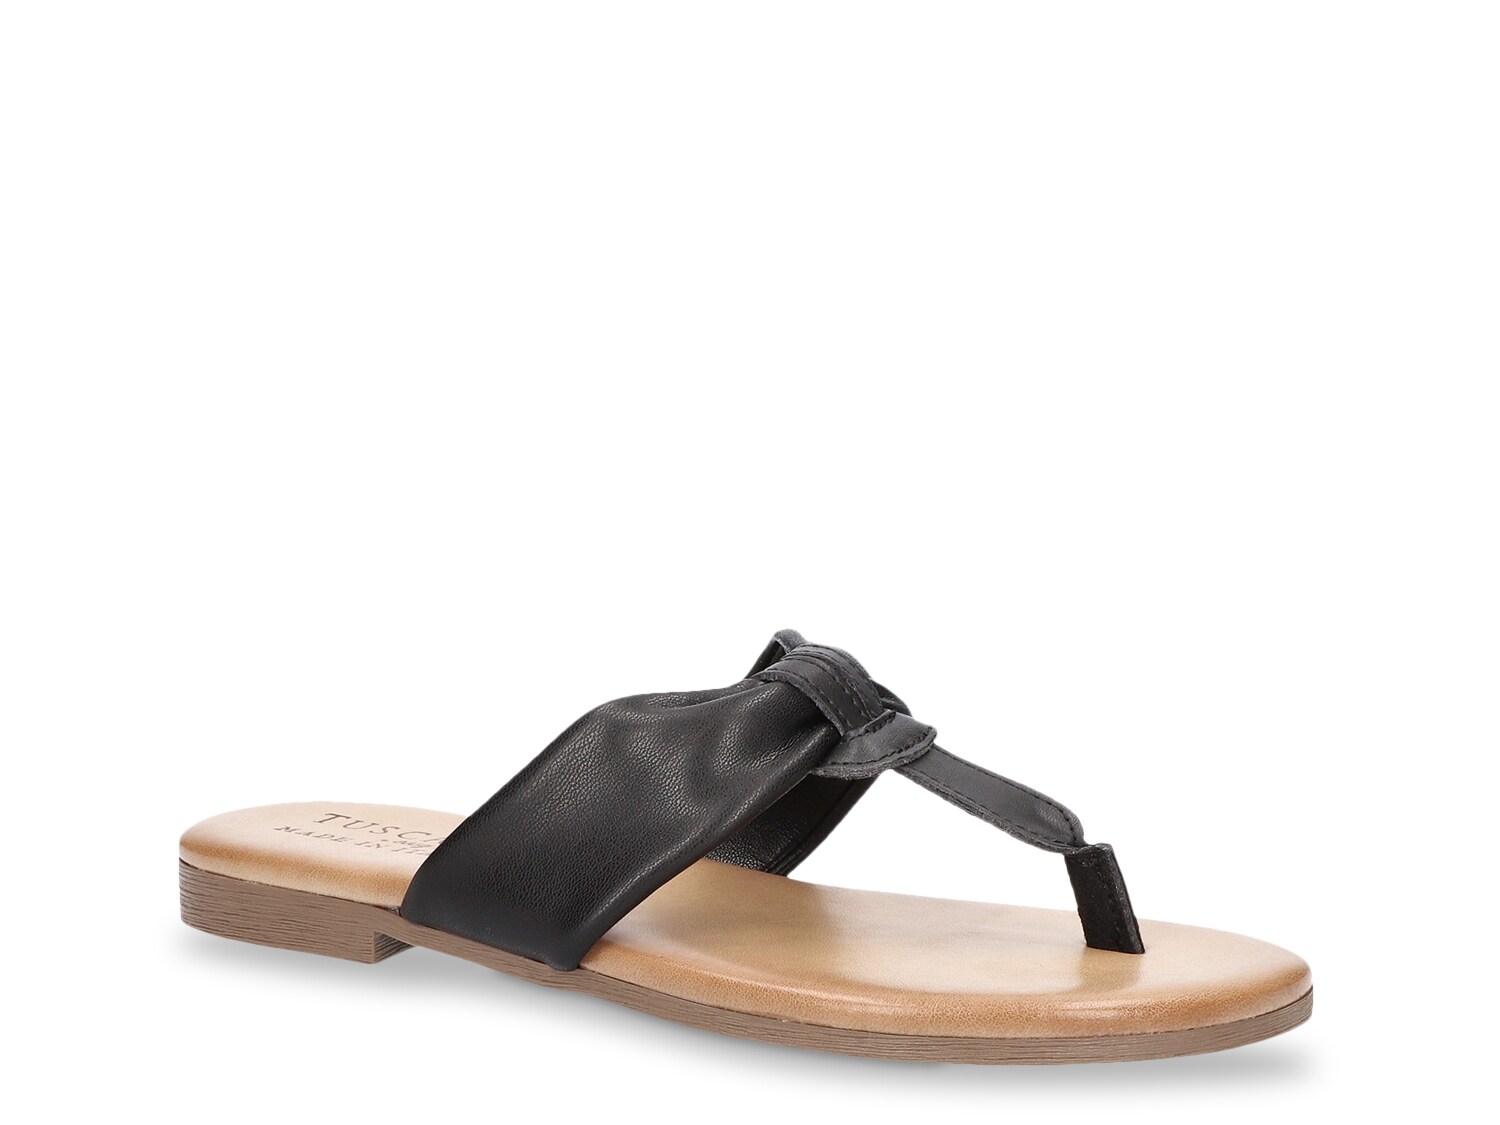 Easy Street Aulina Sandal - Free Shipping | DSW